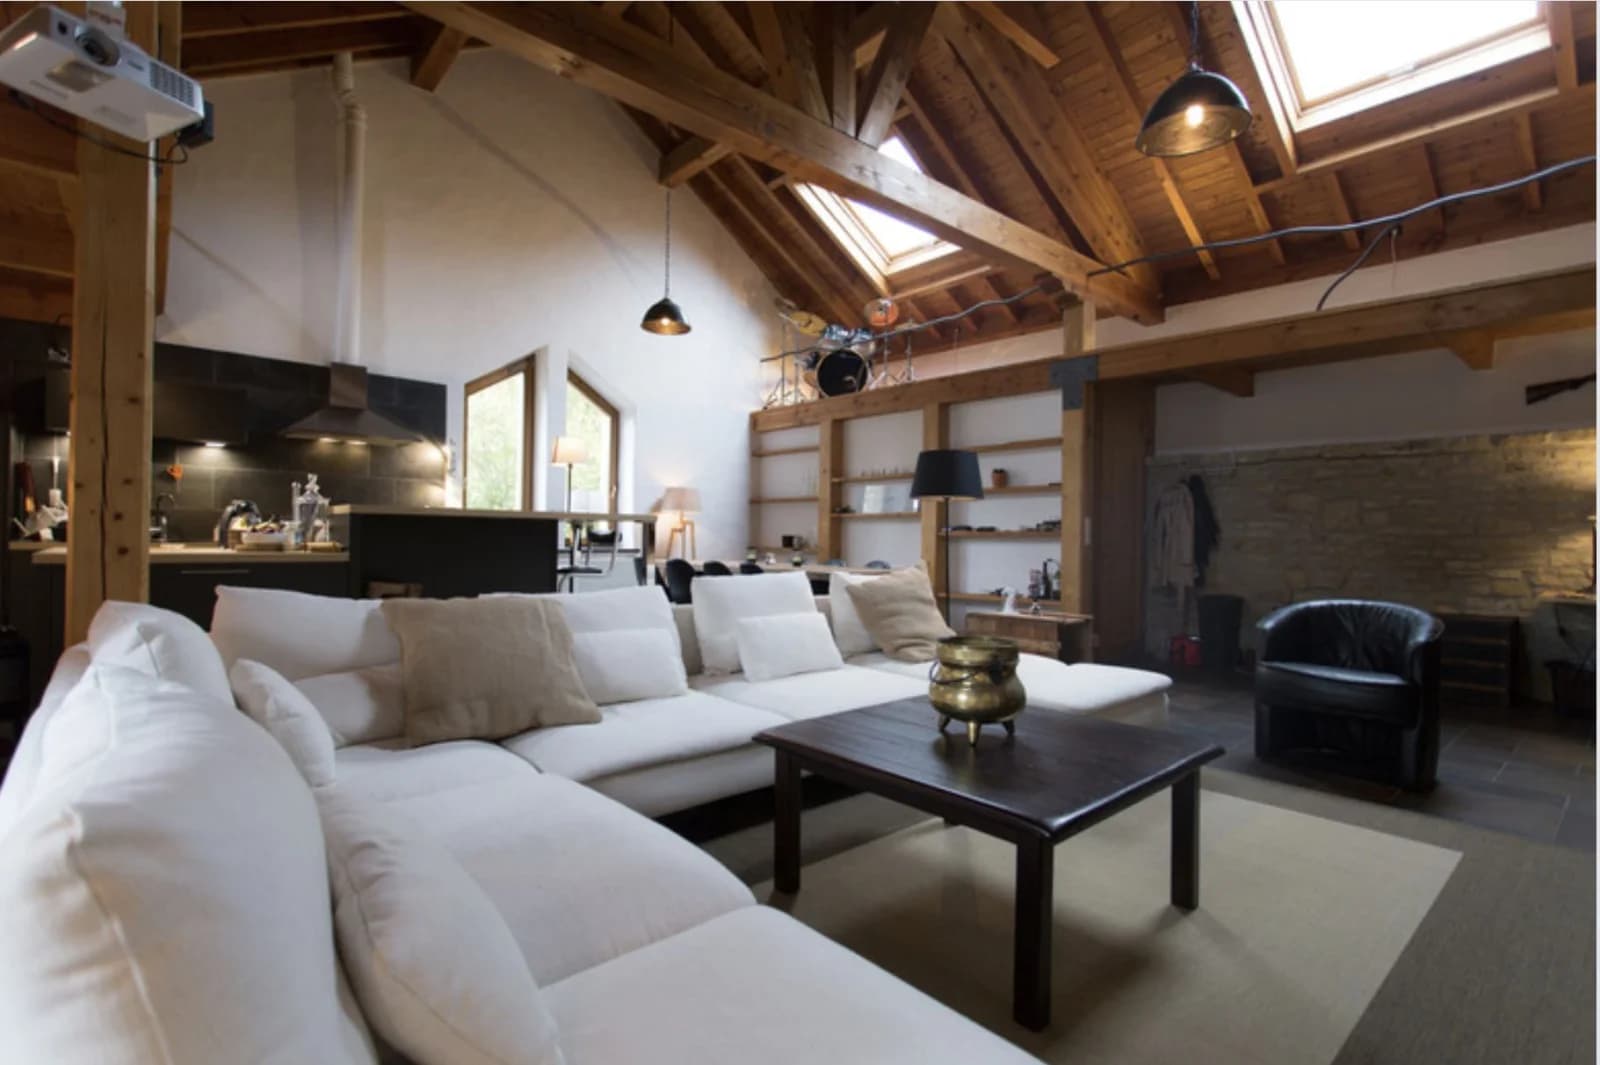 Living room in Large loft with exposed beams and stonework - 1